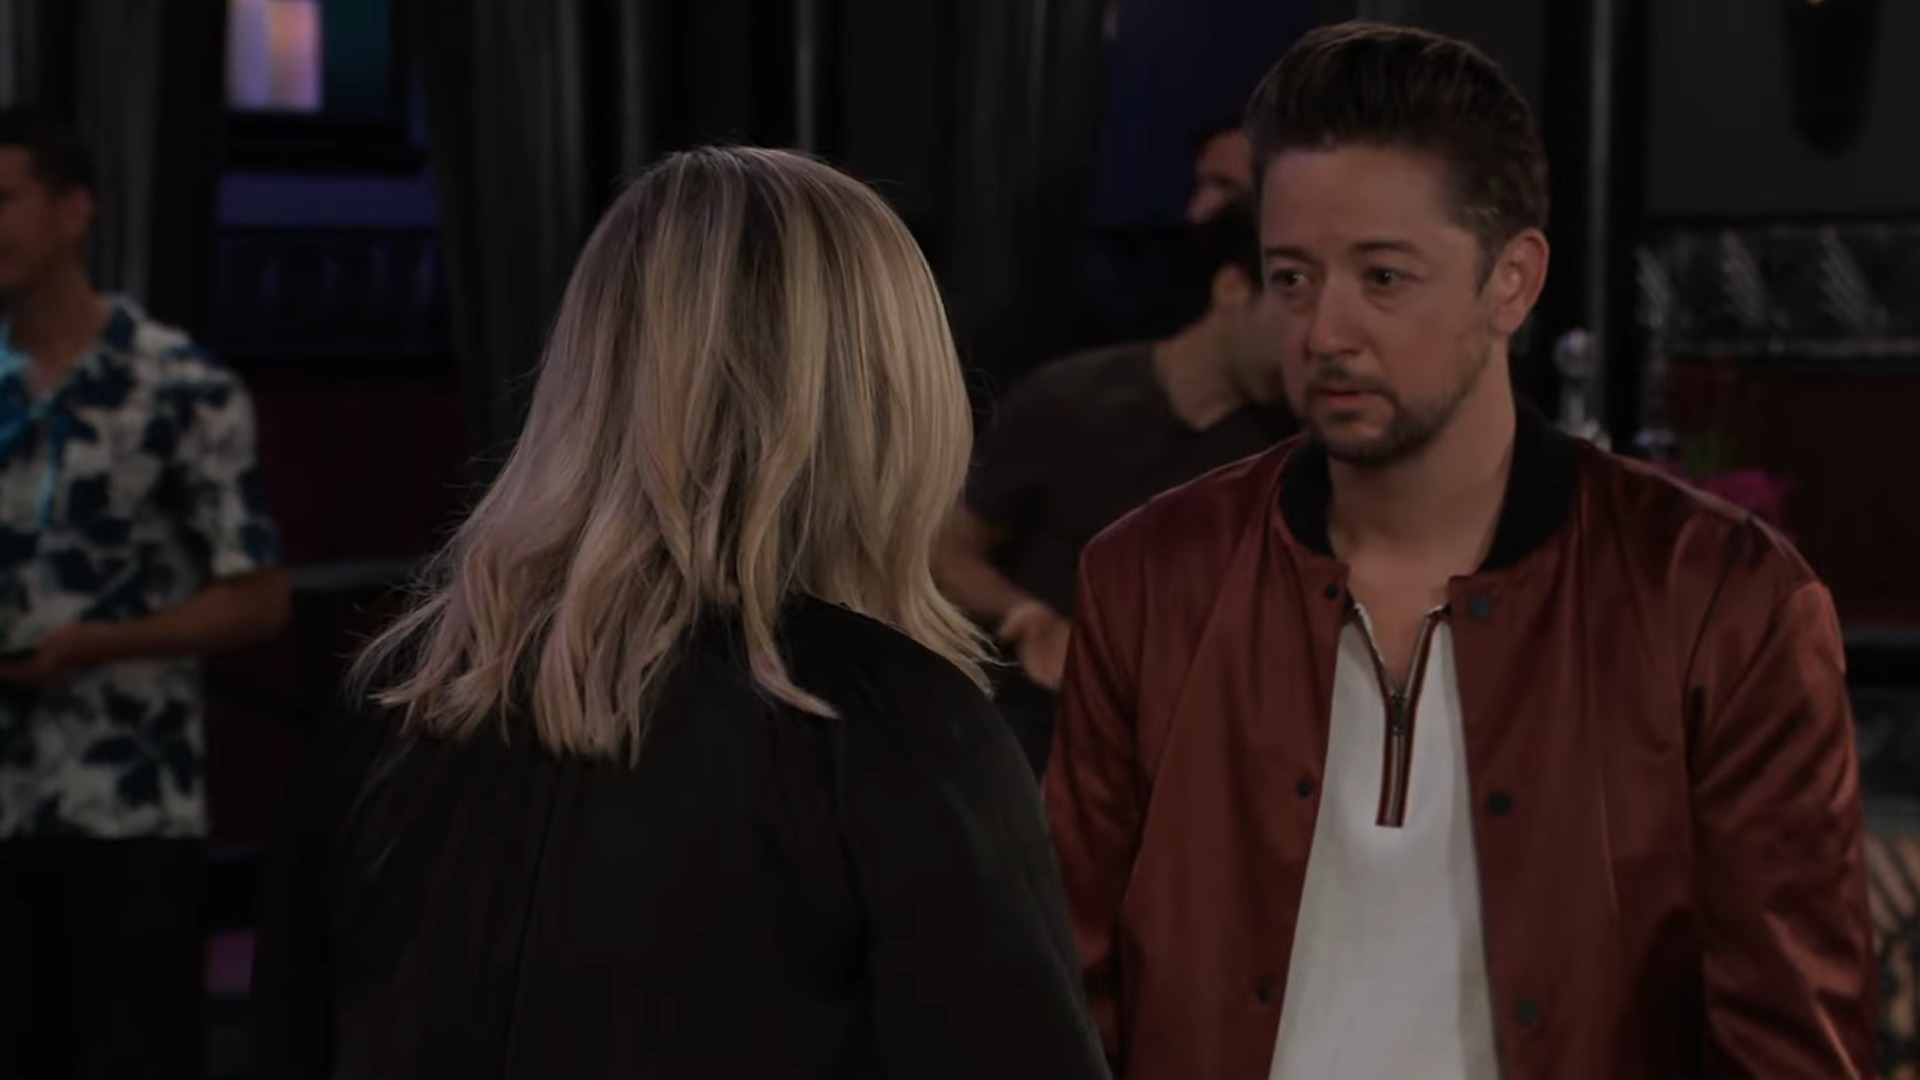 maxie encourages spinelli GH